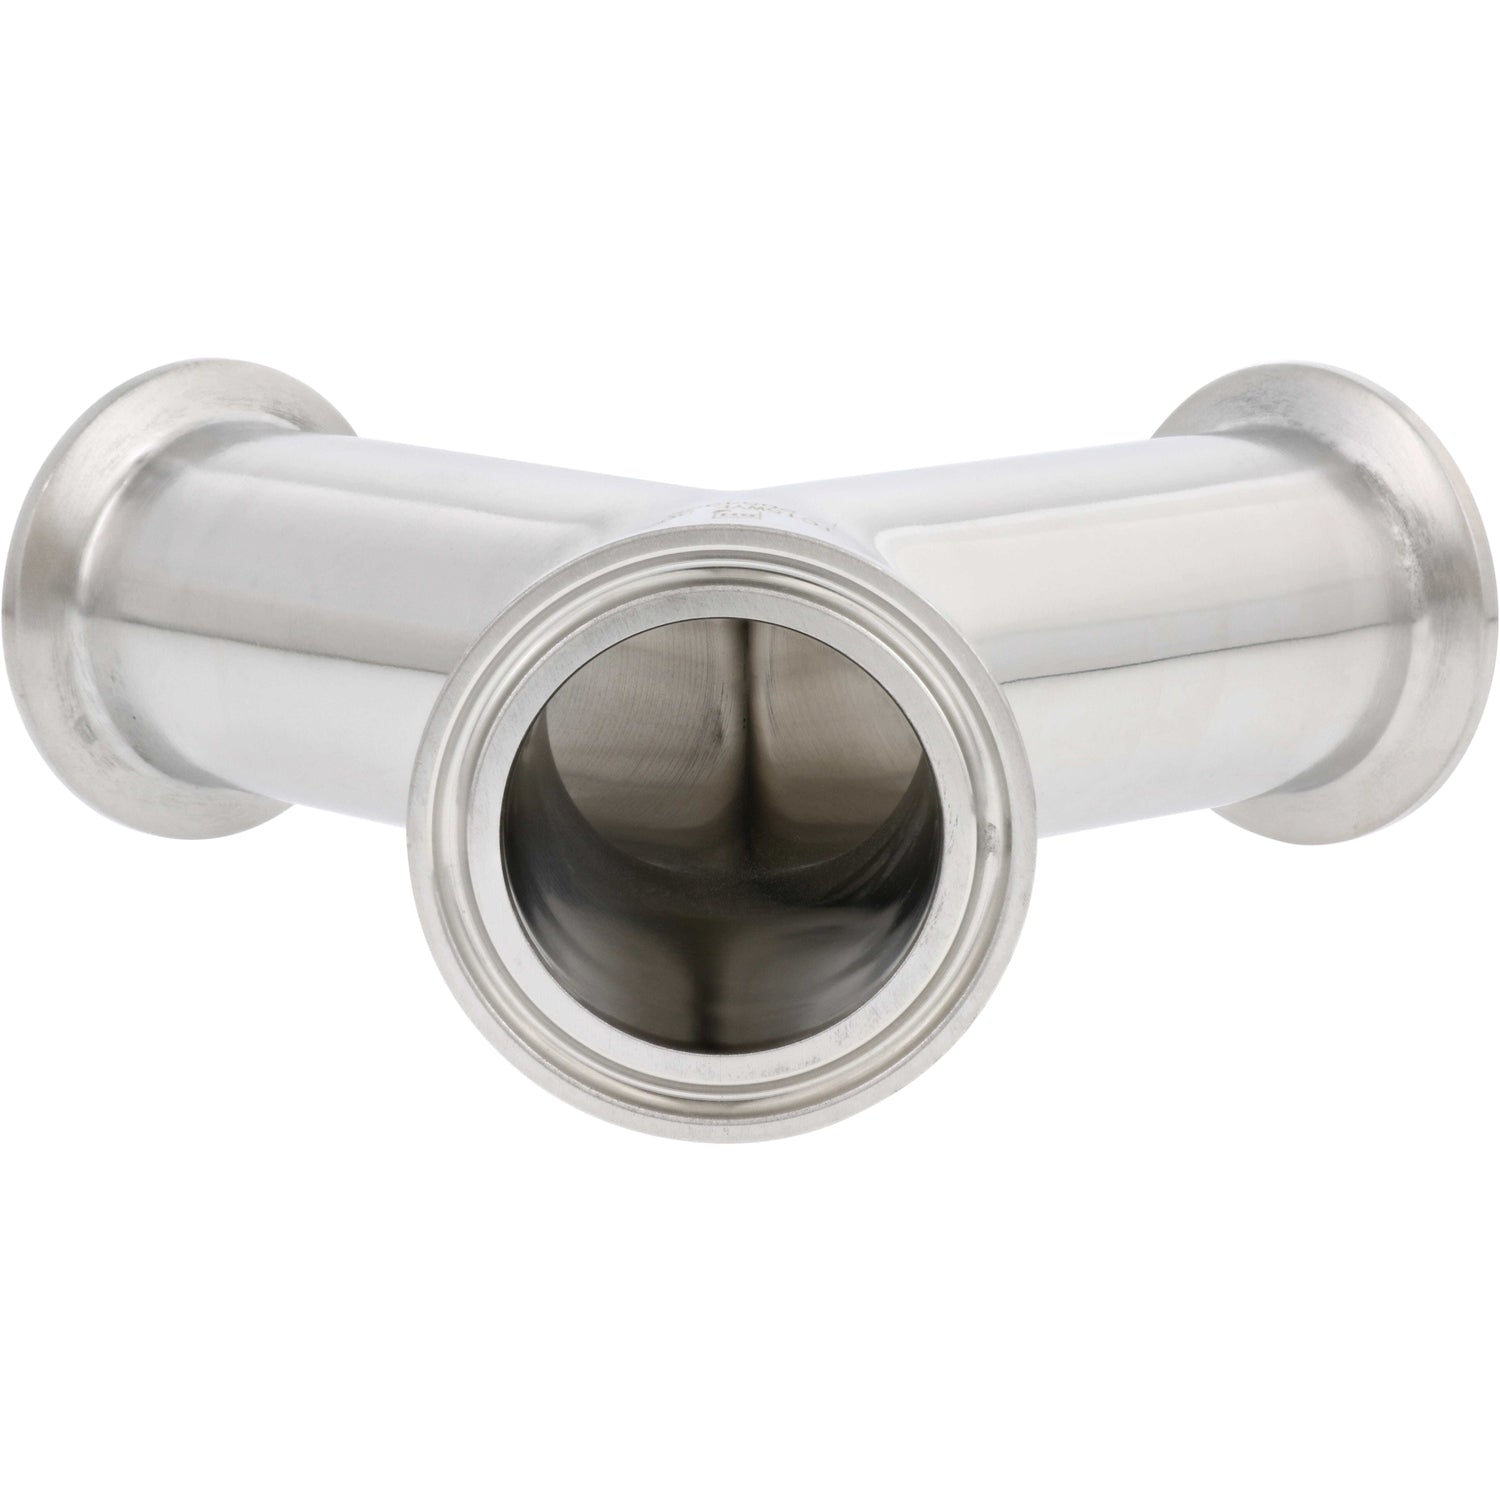 Highly polished stainless steel Wye with 1.5 inch Tri Clamp compatible ends on white background.